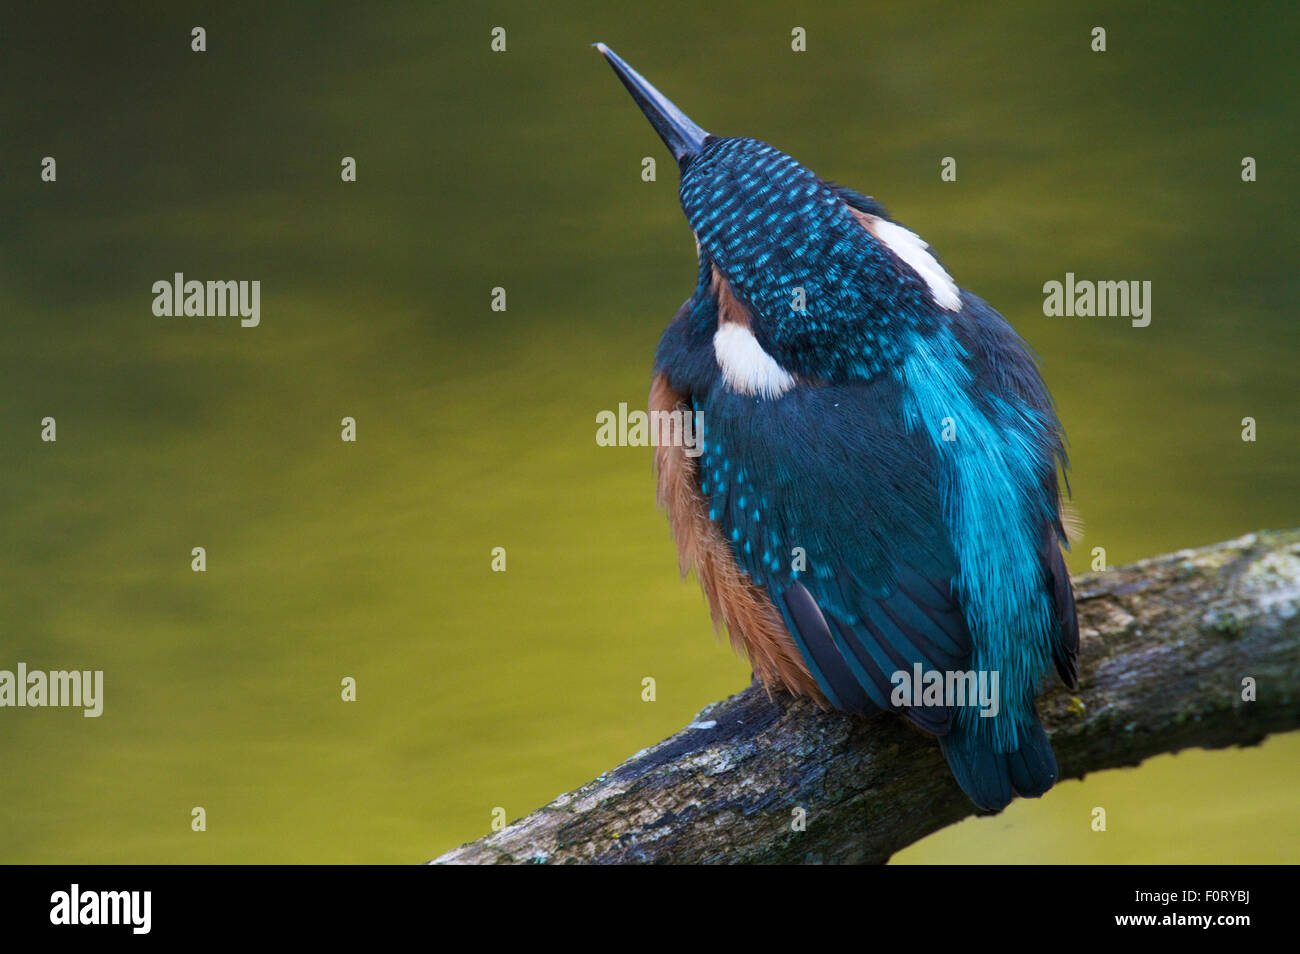 Rear view of Common kingfisher (Alcedo atthis) perched on branch above the River Allier, Pont-du-Chateau, Auvergne, France, August 2010 Stock Photo